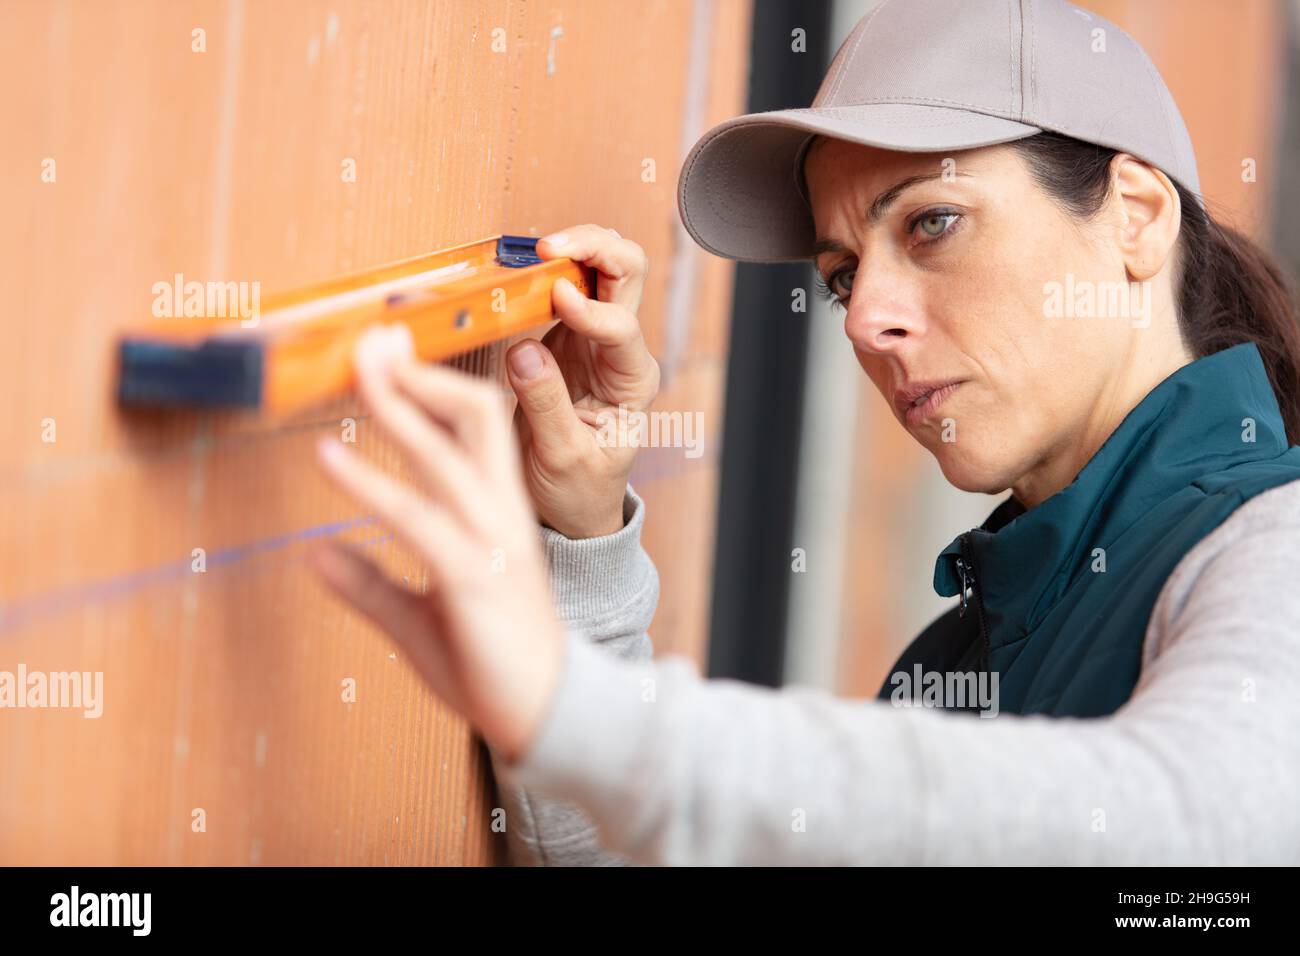 attractive young female construction worker Stock Photo